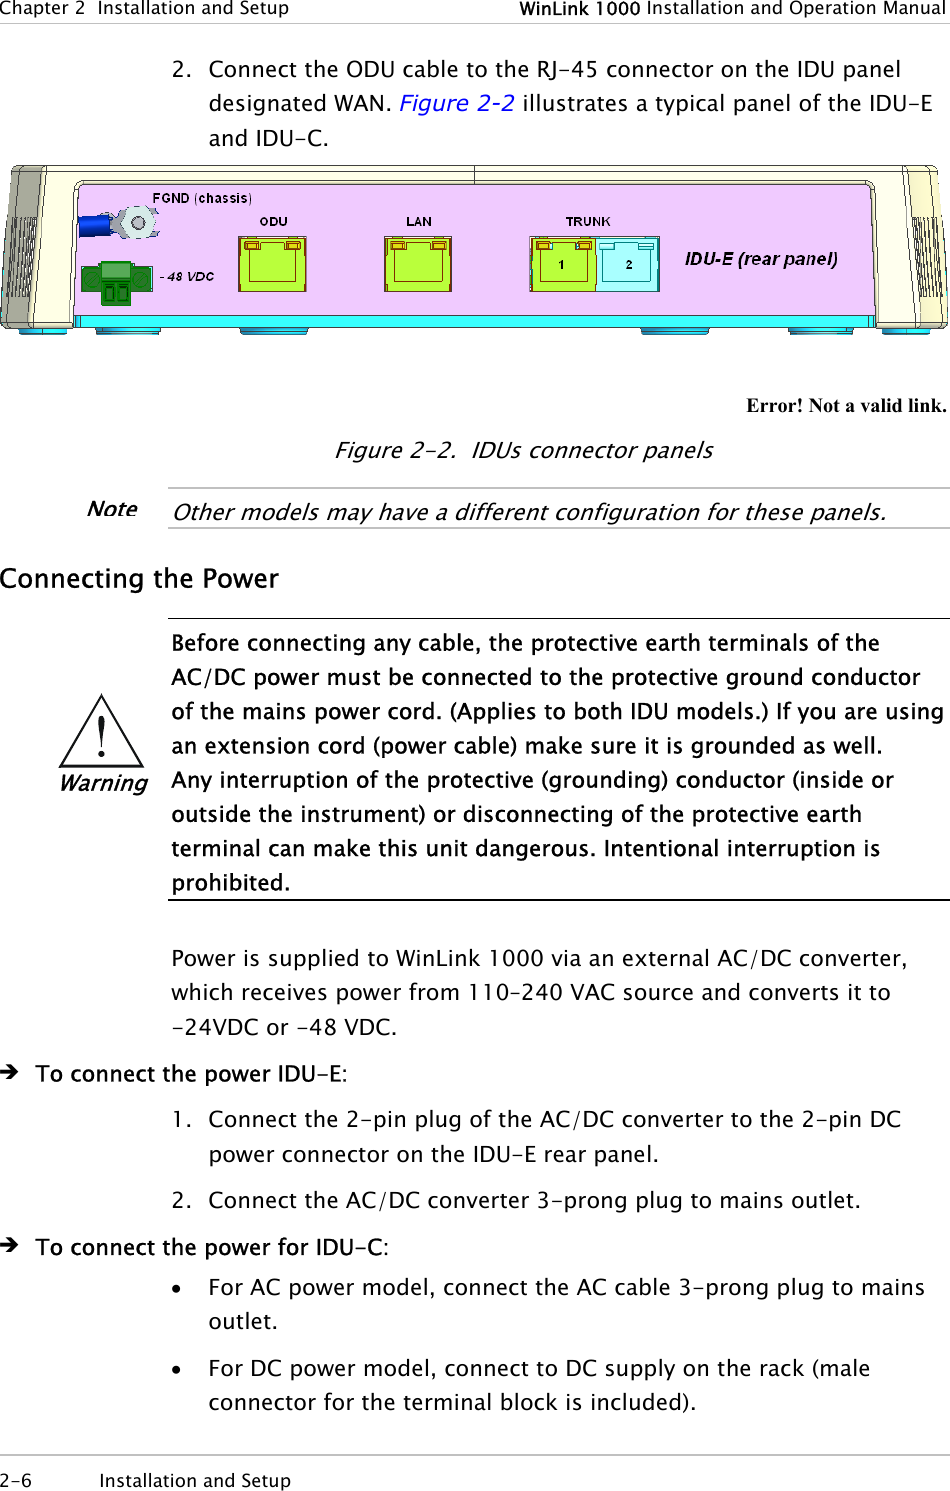 Chapter  2  Installation and Setup  WinLink 1000 Installation and Operation Manual 2-6  Installation and Setup  2. Connect the ODU cable to the RJ-45 connector on the IDU panel designated WAN. Figure  2-2 illustrates a typical panel of the IDU-E and IDU-C.   Error! Not a valid link. Figure  2-2.  IDUs connector panels  Other models may have a different configuration for these panels.  Connecting the Power  Before connecting any cable, the protective earth terminals of the AC/DC power must be connected to the protective ground conductor of the mains power cord. (Applies to both IDU models.) If you are using an extension cord (power cable) make sure it is grounded as well. Any interruption of the protective (grounding) conductor (inside or outside the instrument) or disconnecting of the protective earth terminal can make this unit dangerous. Intentional interruption is prohibited.  Power is supplied to WinLink 1000 via an external AC/DC converter, which receives power from 110–240 VAC source and converts it to -24VDC or -48 VDC. Î To connect the power IDU-E: 1. Connect the 2-pin plug of the AC/DC converter to the 2-pin DC power connector on the IDU-E rear panel. 2. Connect the AC/DC converter 3-prong plug to mains outlet. Î To connect the power for IDU-C: • For AC power model, connect the AC cable 3-prong plug to mains outlet. • For DC power model, connect to DC supply on the rack (male connector for the terminal block is included). Warning Note